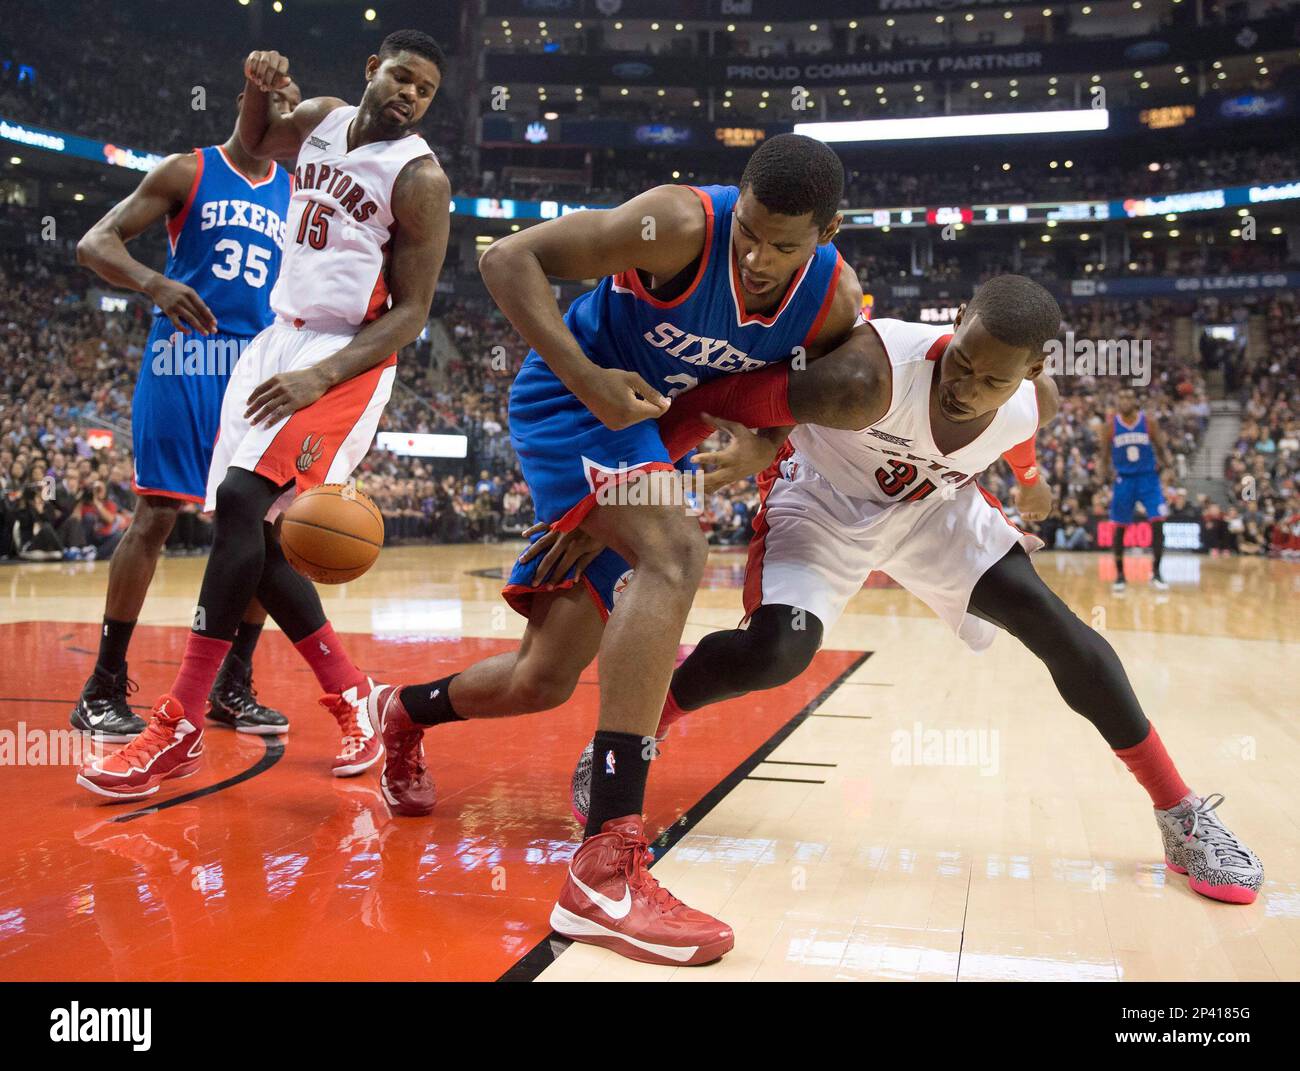 Toronto Raptors Terrence Ross, right, vies for the ball with Philadelphia 76ers Hollis Thompson as Raptors Amir Johnson (15) and 76ers Henry Sims (35) watch during the first half of an NBA